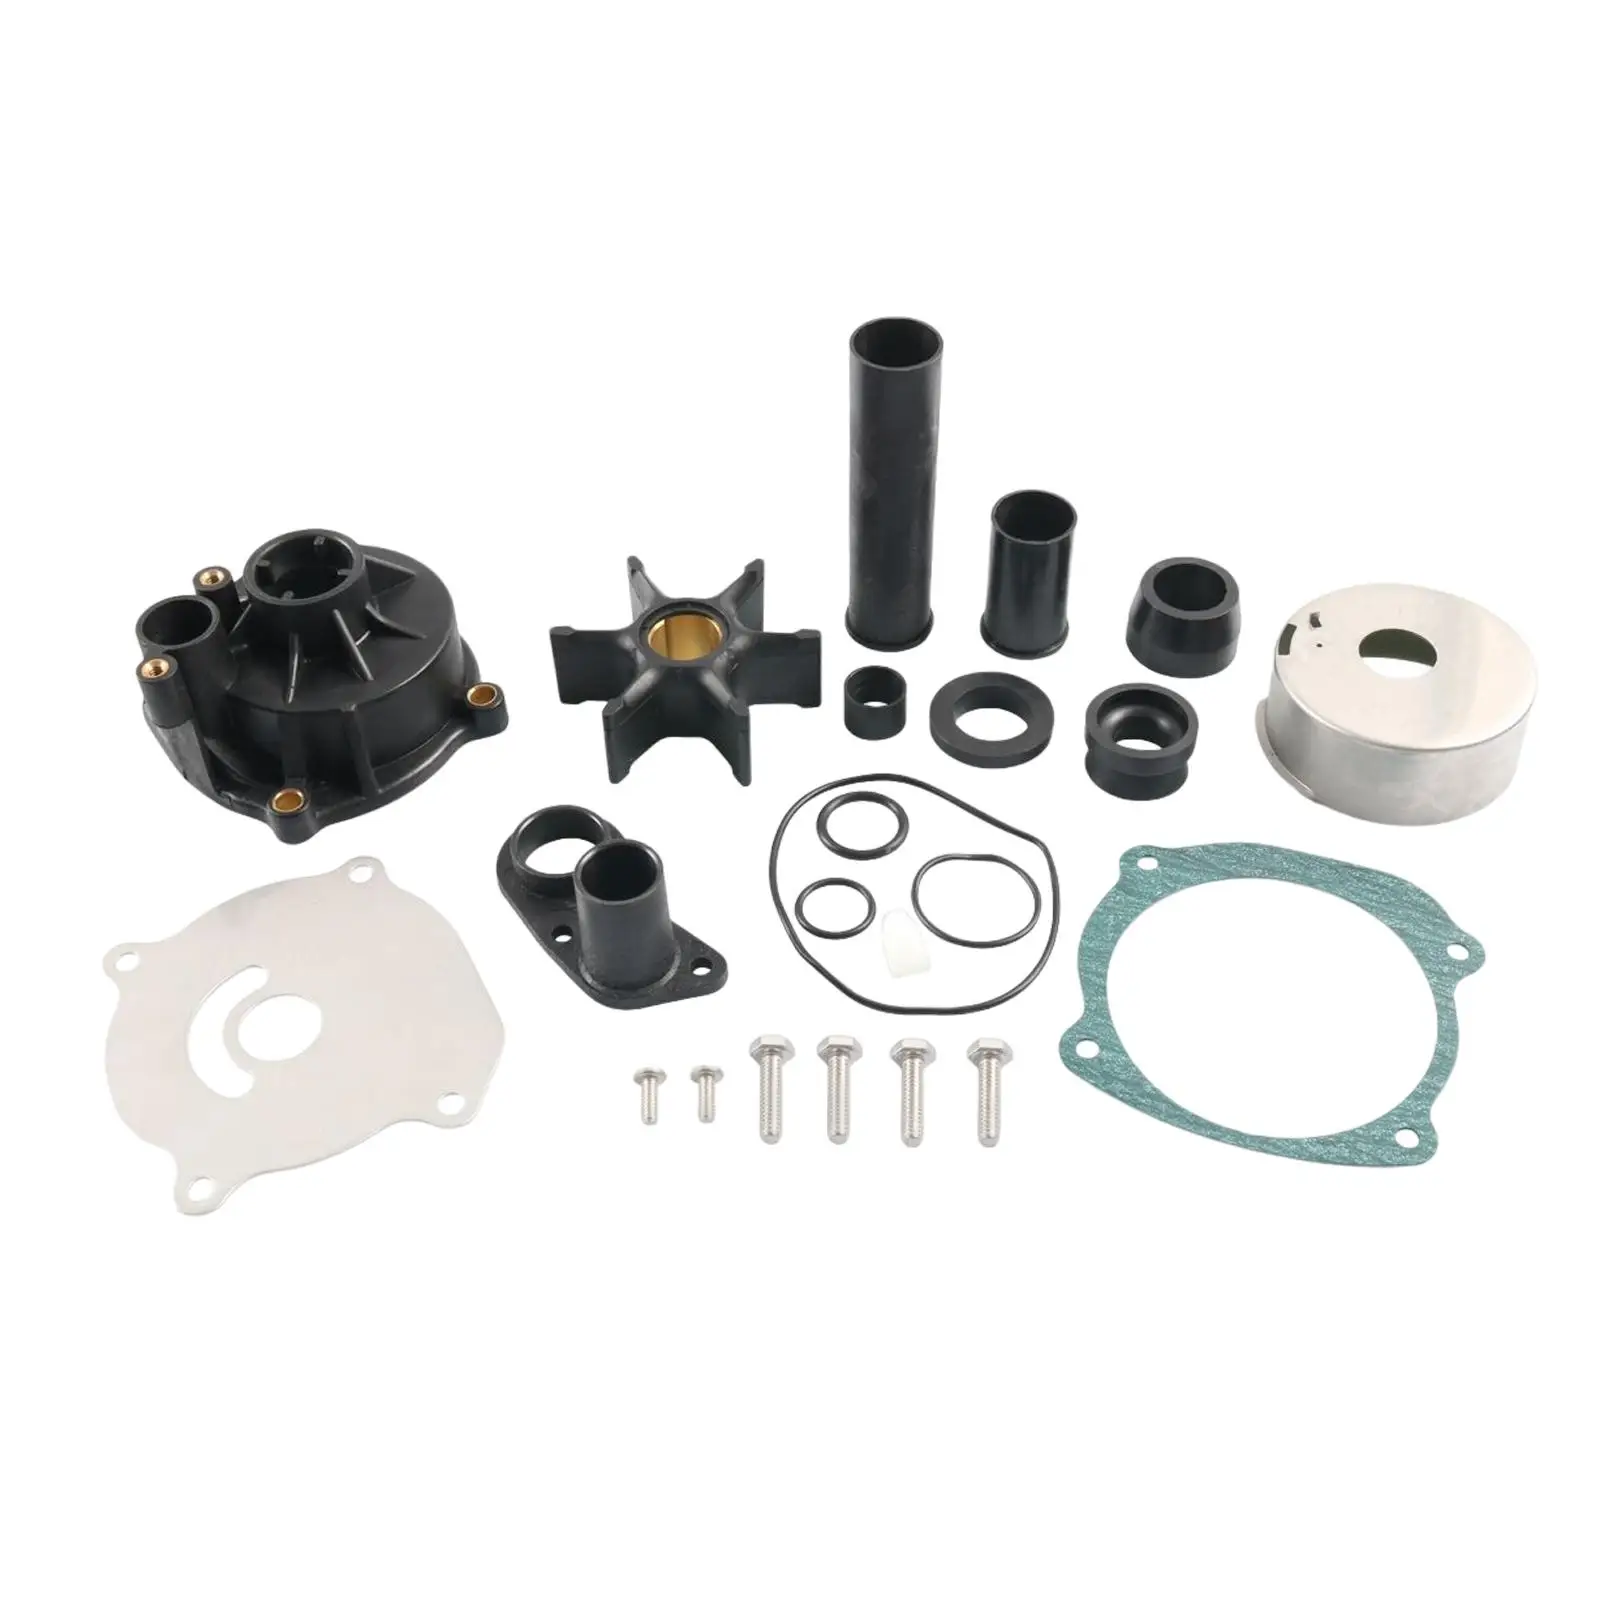 Water Pump Kit with Housing for Johnson Evinrude 140HP High Performance